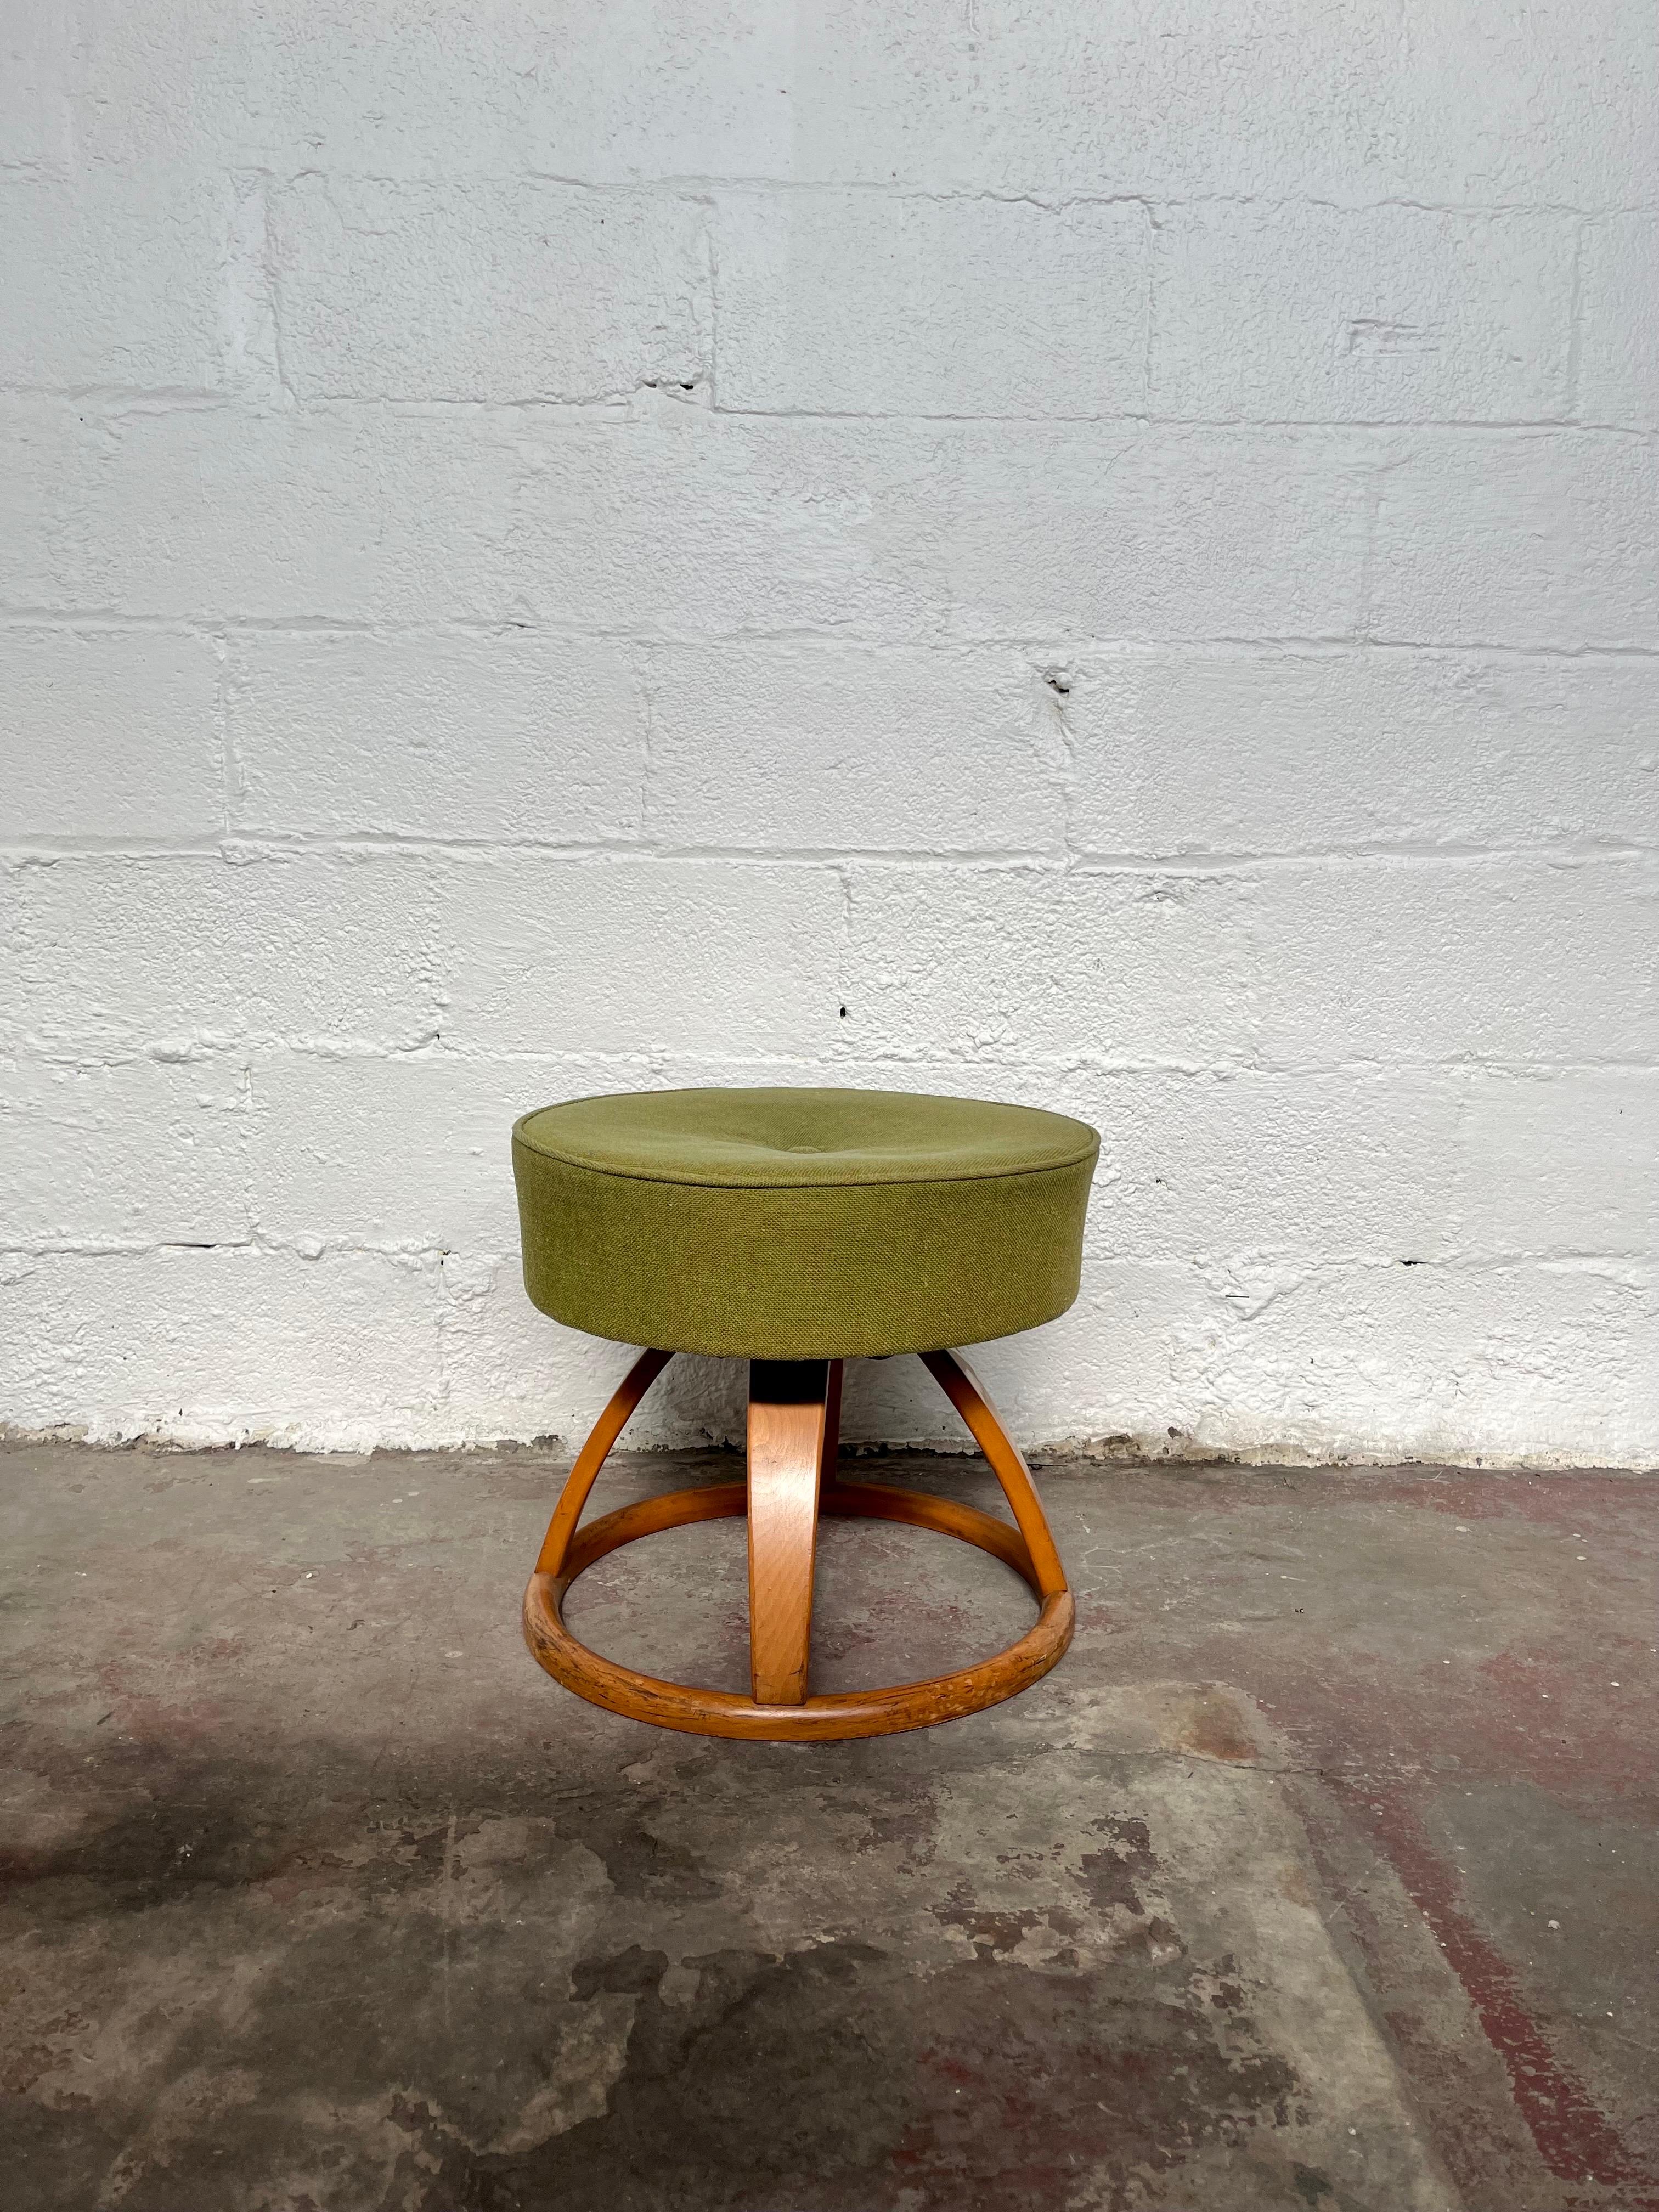 Wonderful Heywood Wakefield vanity stool or ottoman. Classic Wakefield style in in original condition. Great period upholstery.
Curbside to NYC/Philly $350